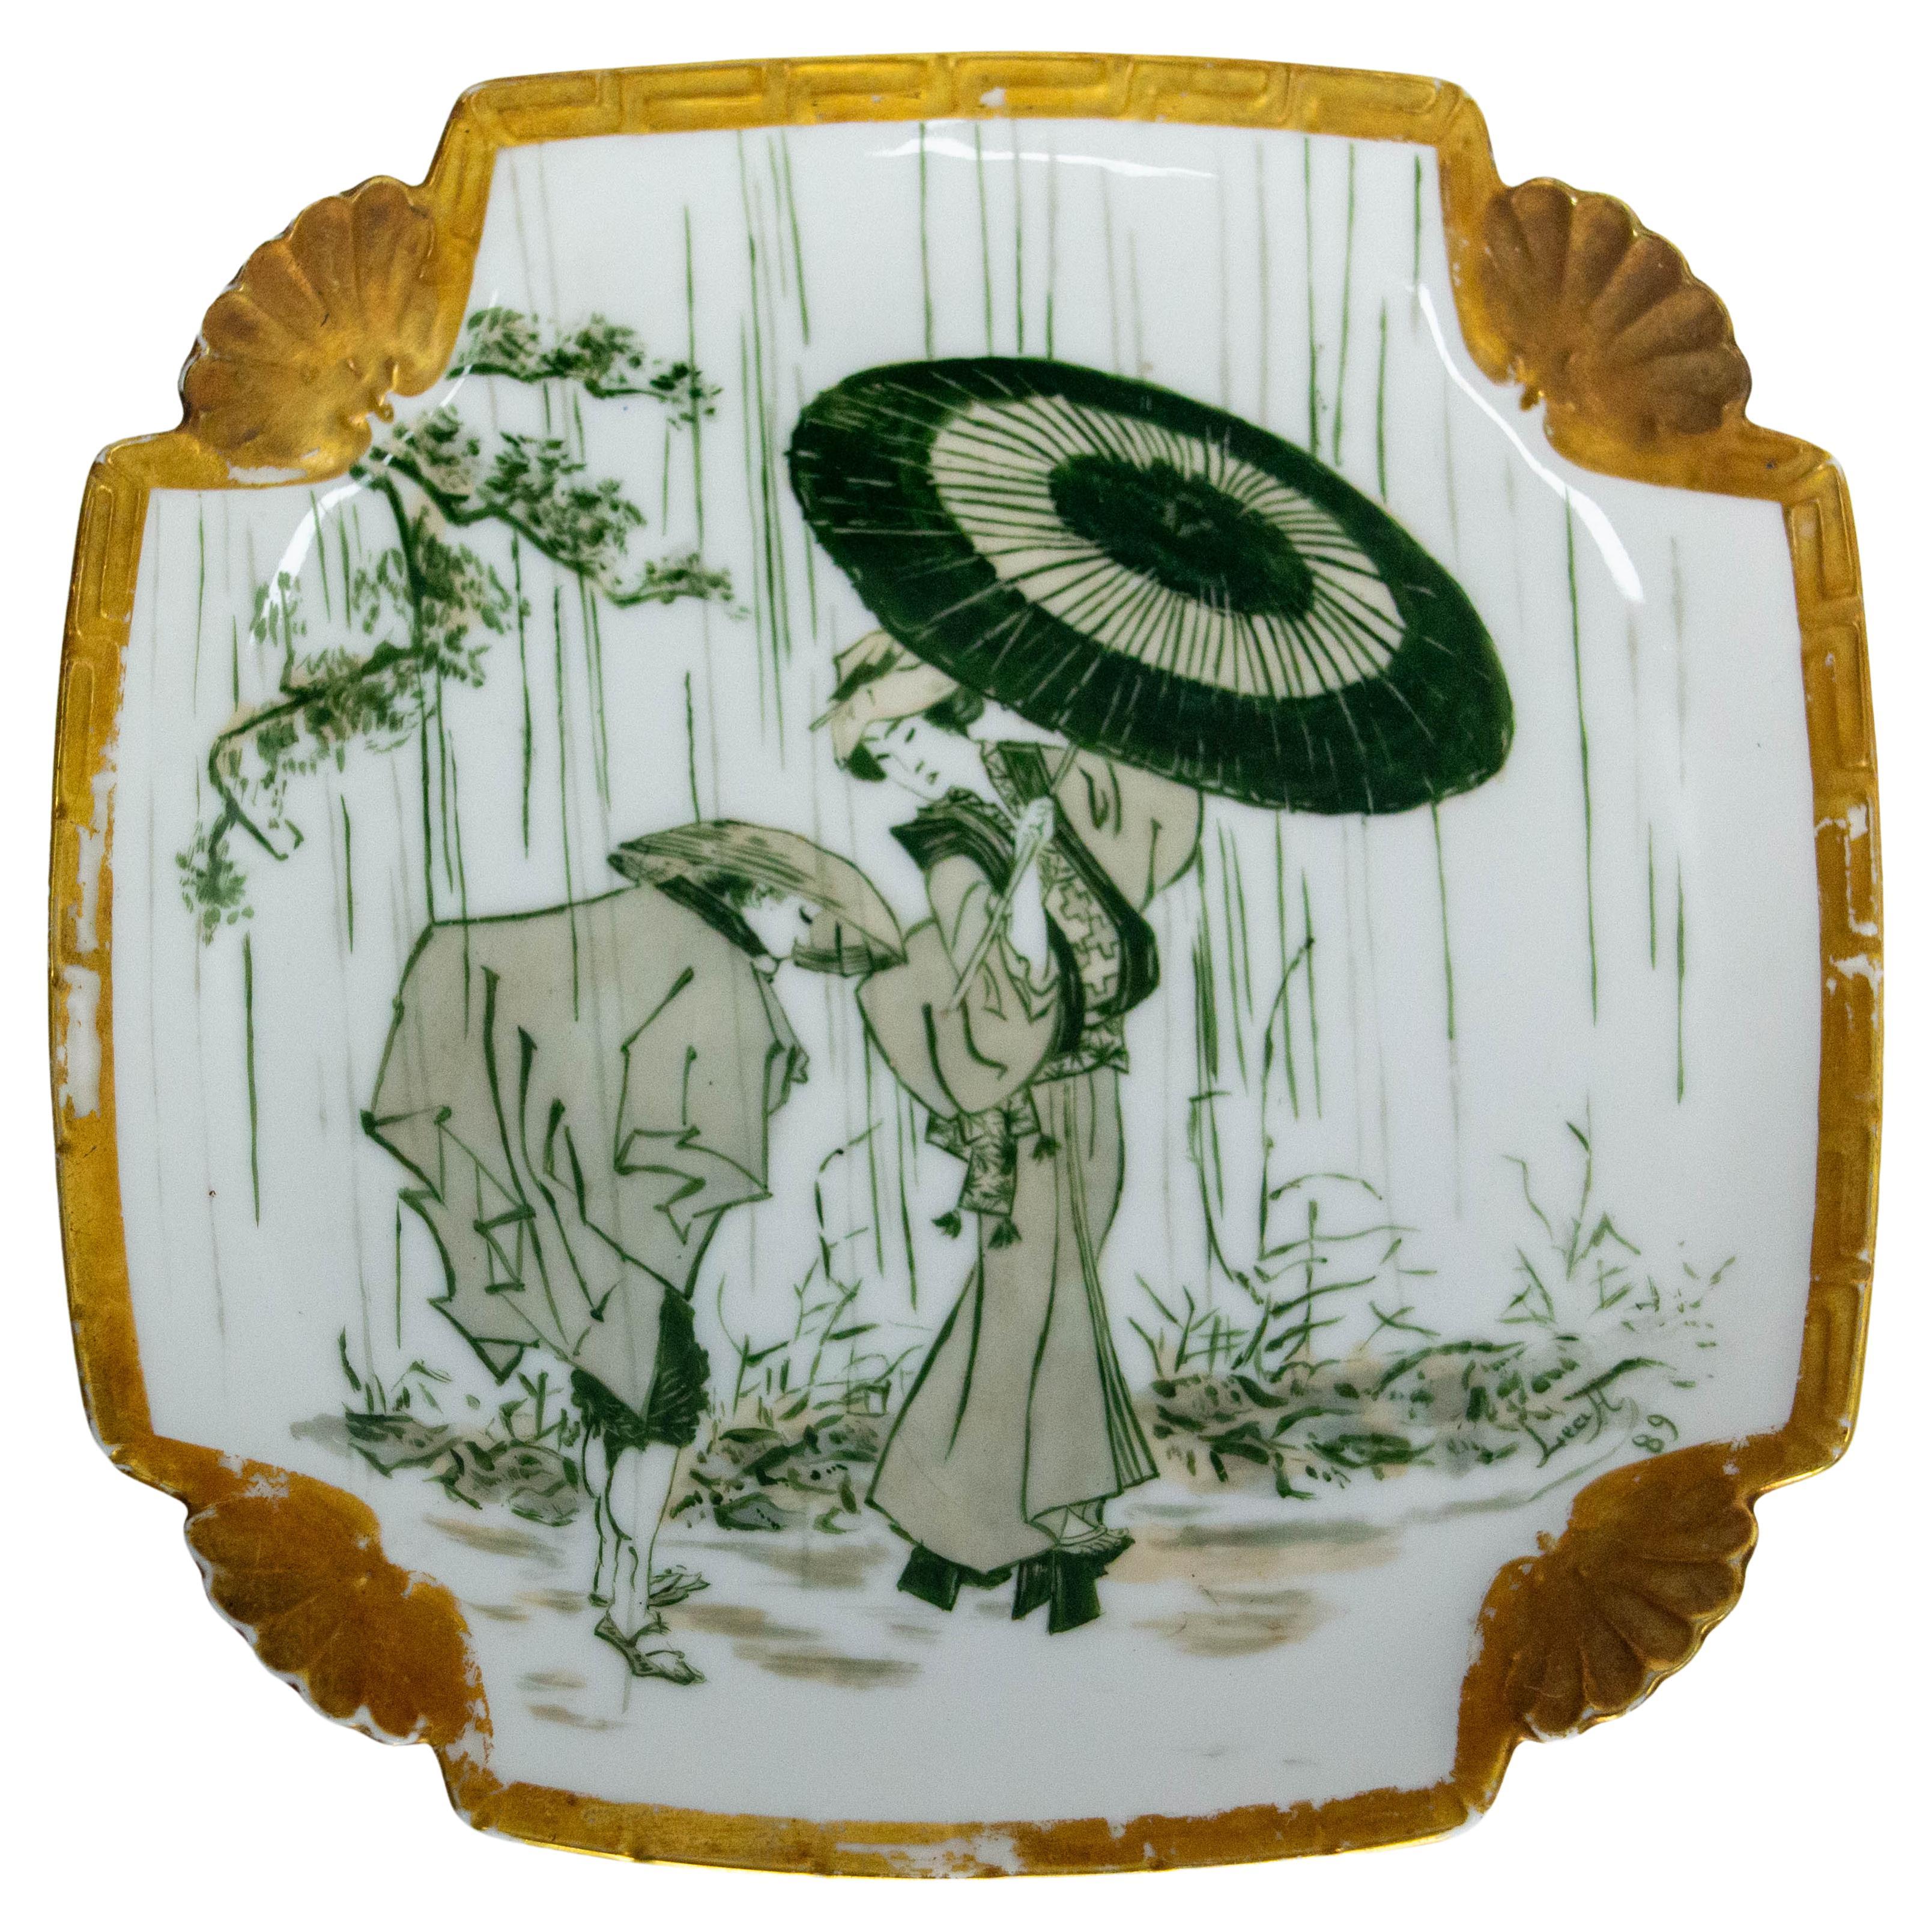 Japanese Ceramic Plate Decorated with Geisha & Peasan, France late 19th C